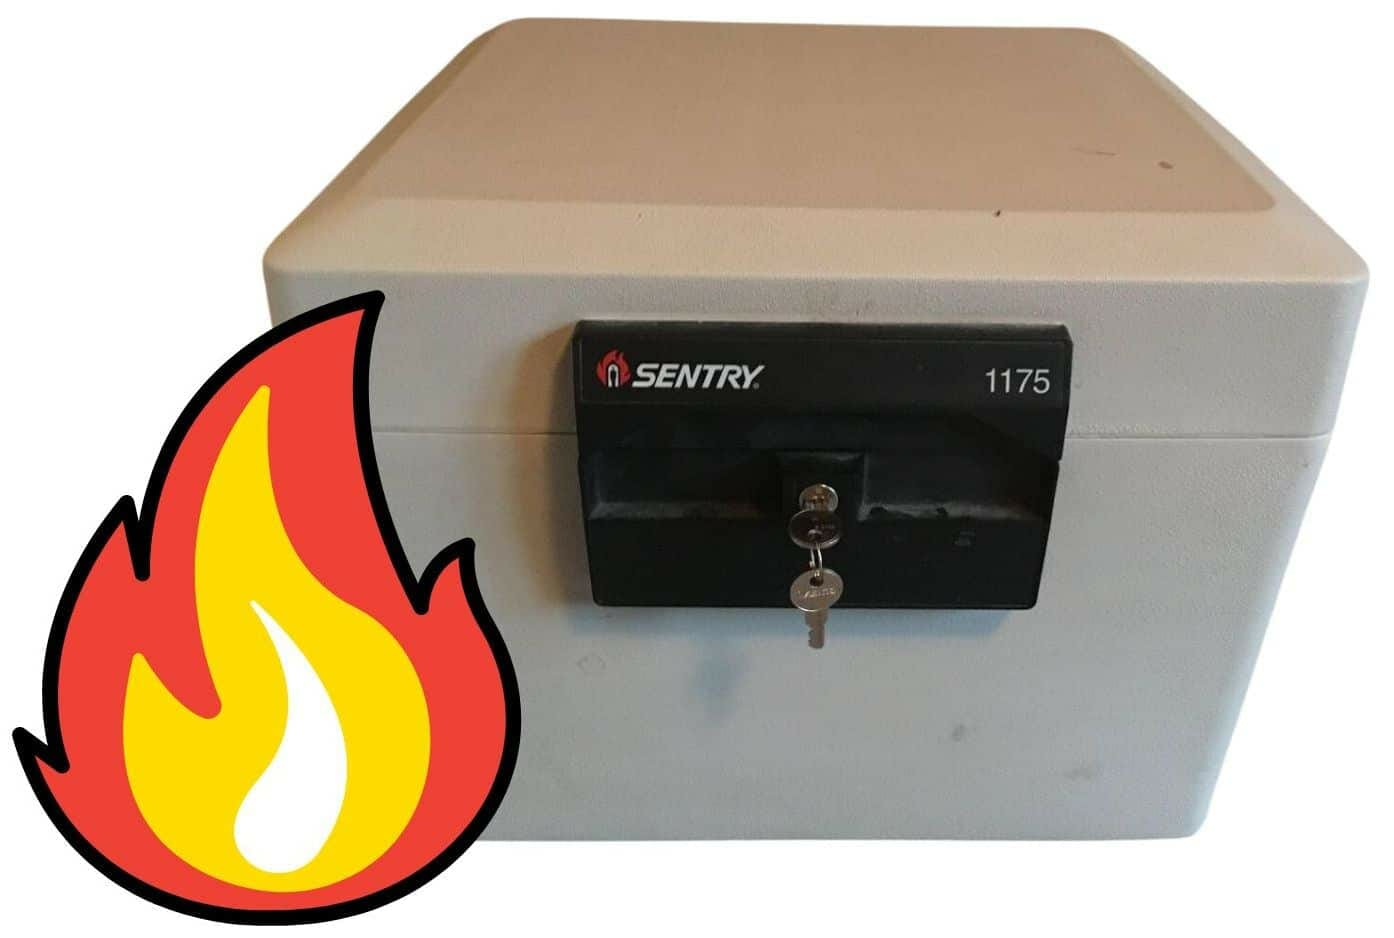 SentrySafe 1175 and a flame icon